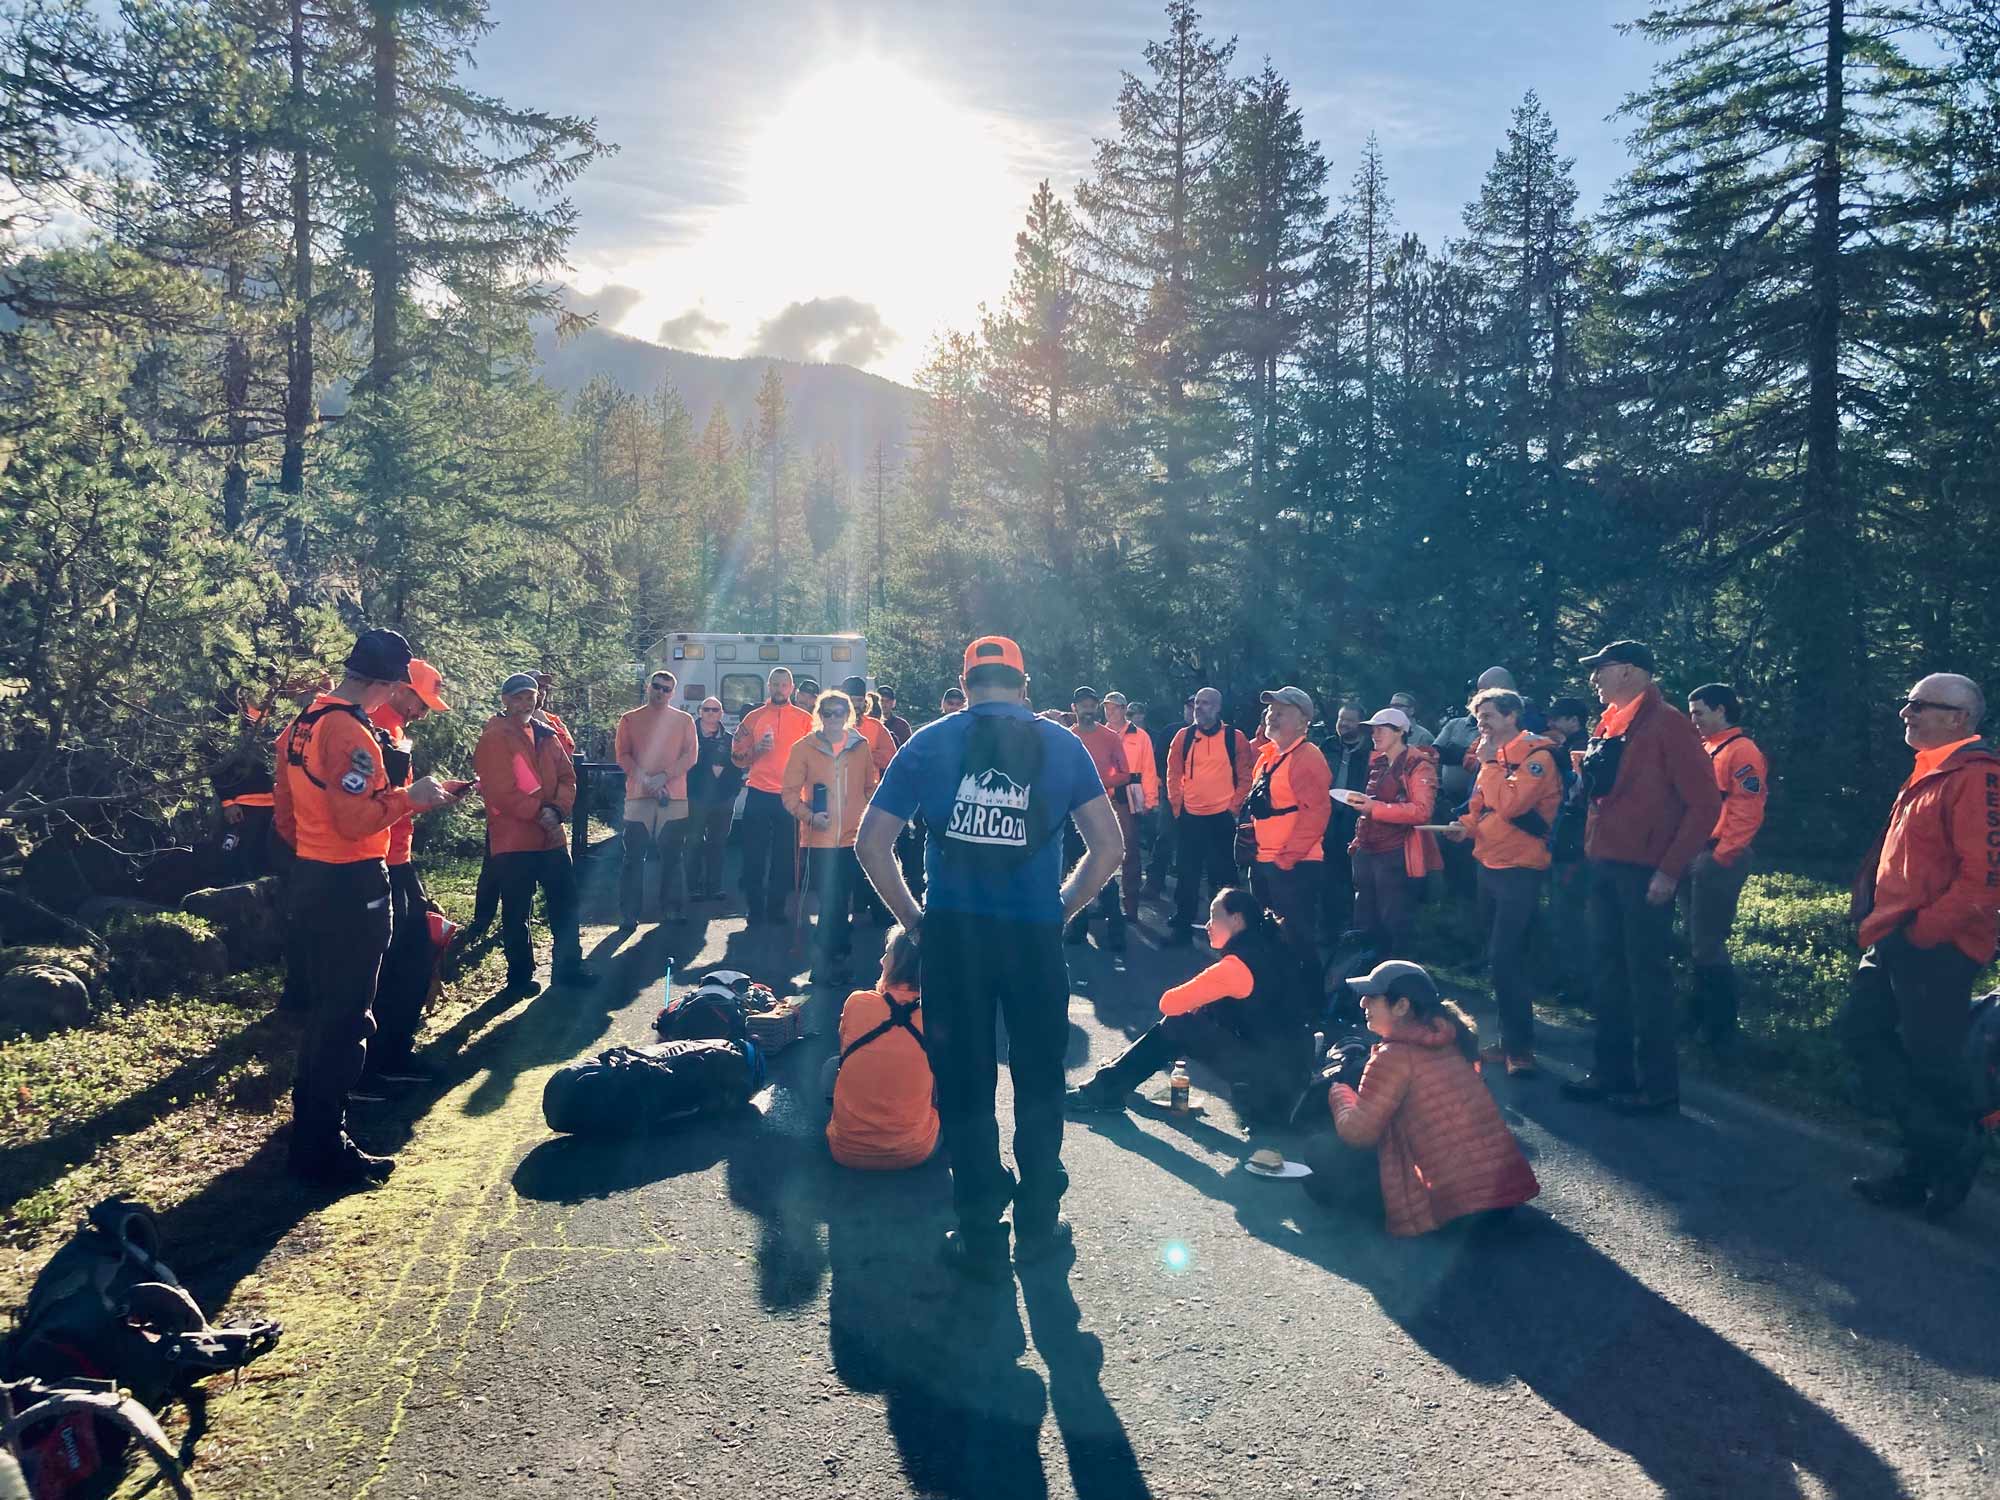 Several search and rescue members wearing orange shirts, some wearing blue, gathered together on a campground road in the forest